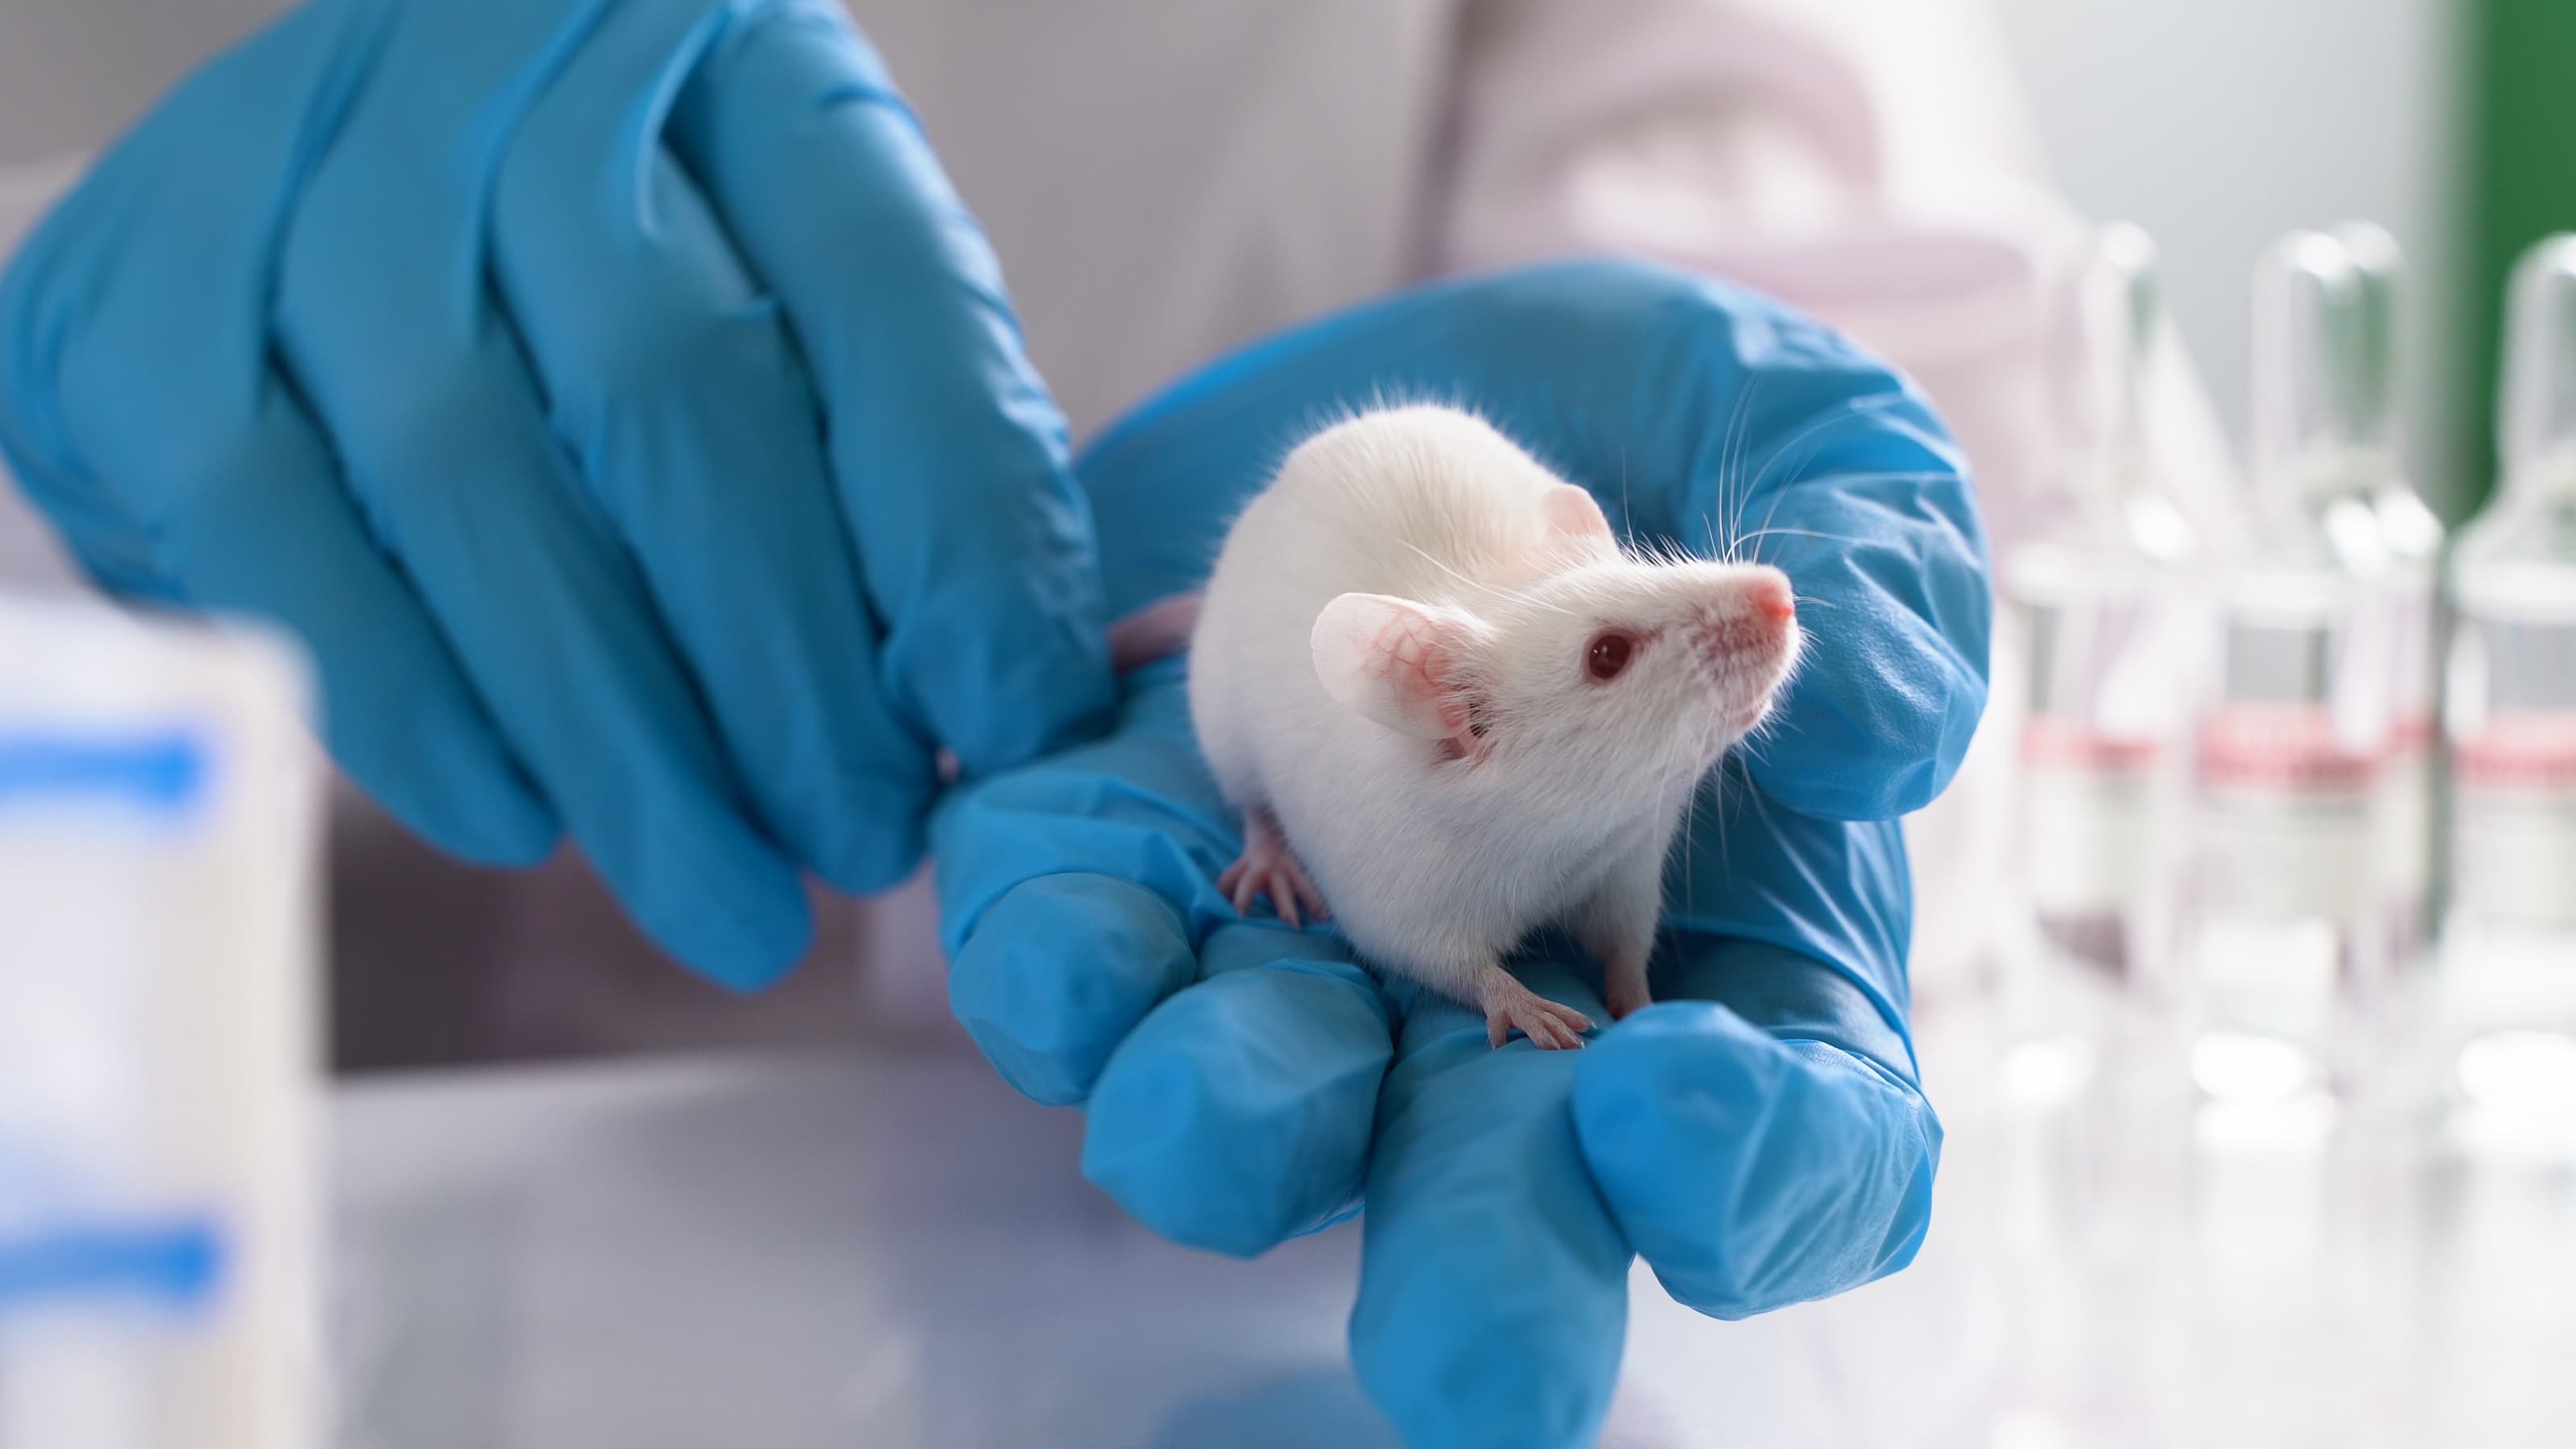 Lab mouse being used as research subject